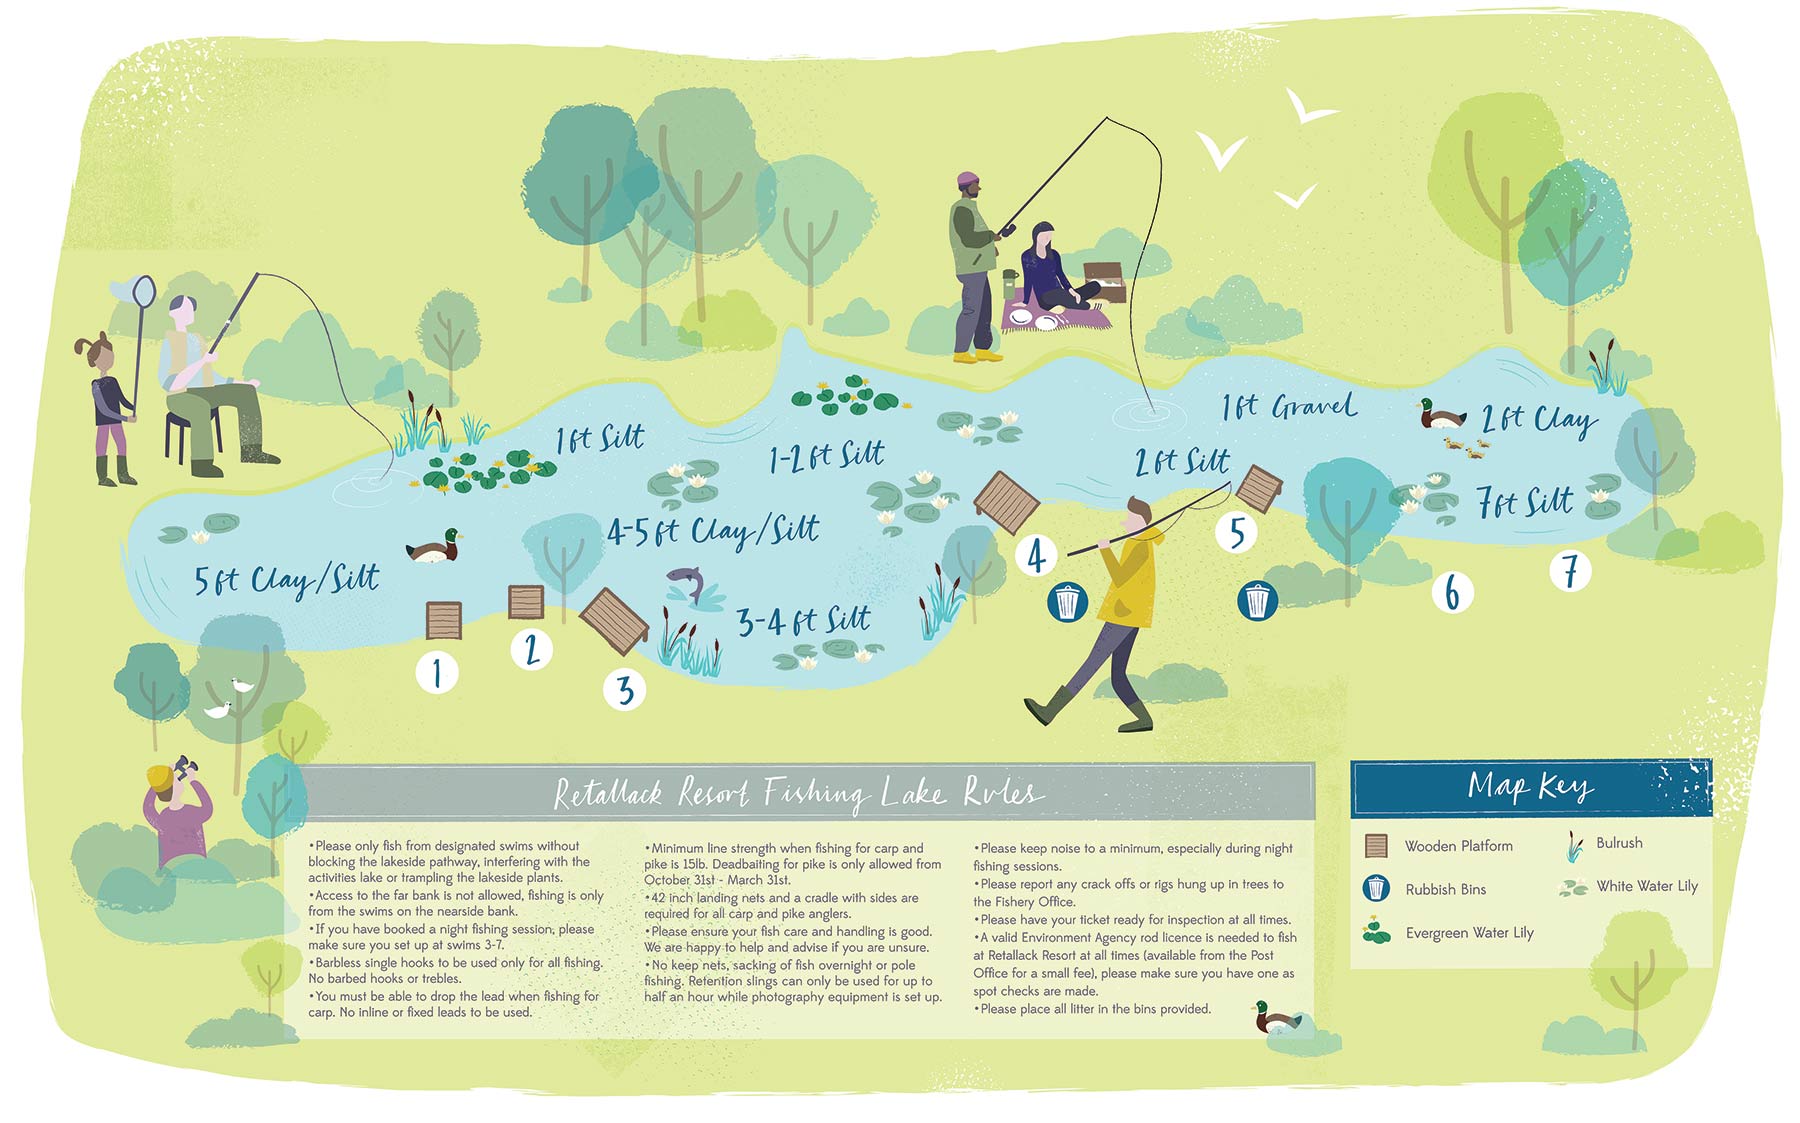 Illustrated Map of the Fishing Lake at Retallack Resort & Spa, Cornwall by Elly Jahnz, Foxcub Studio